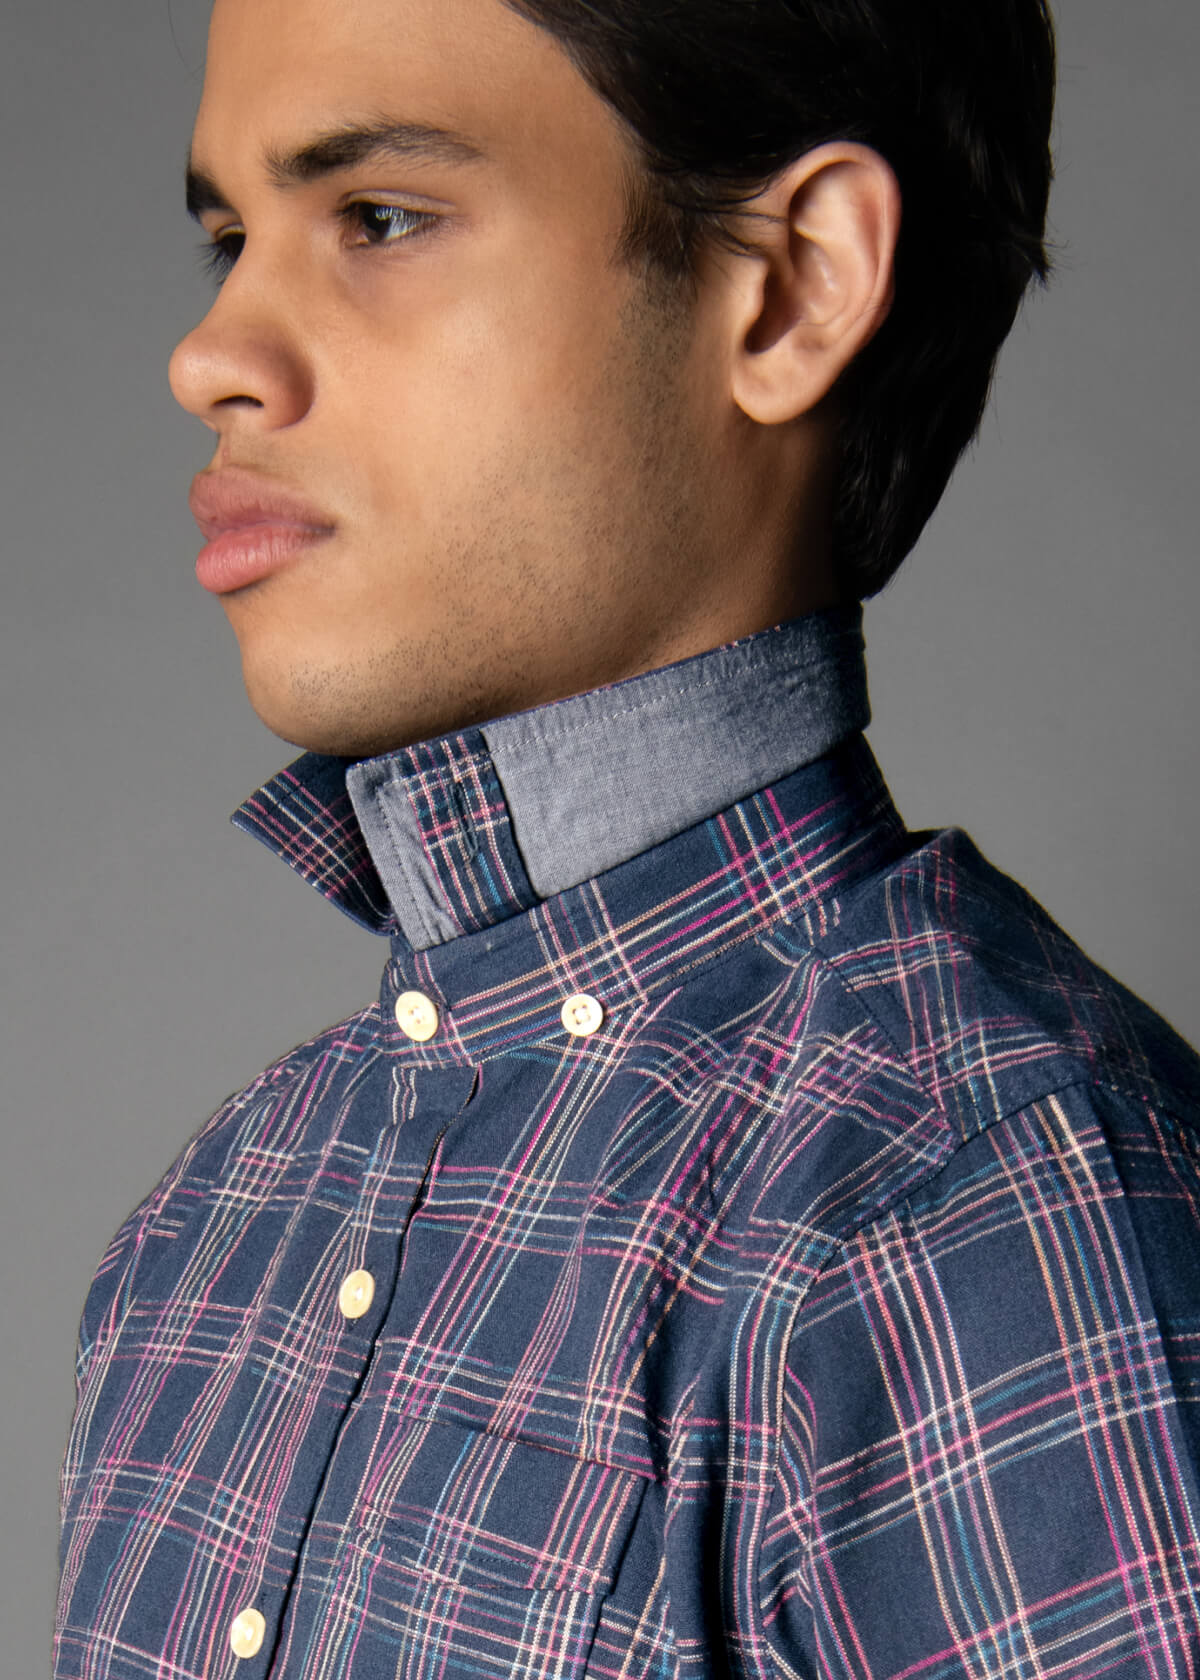 men's short sleeve check shirt in navy and pink tones